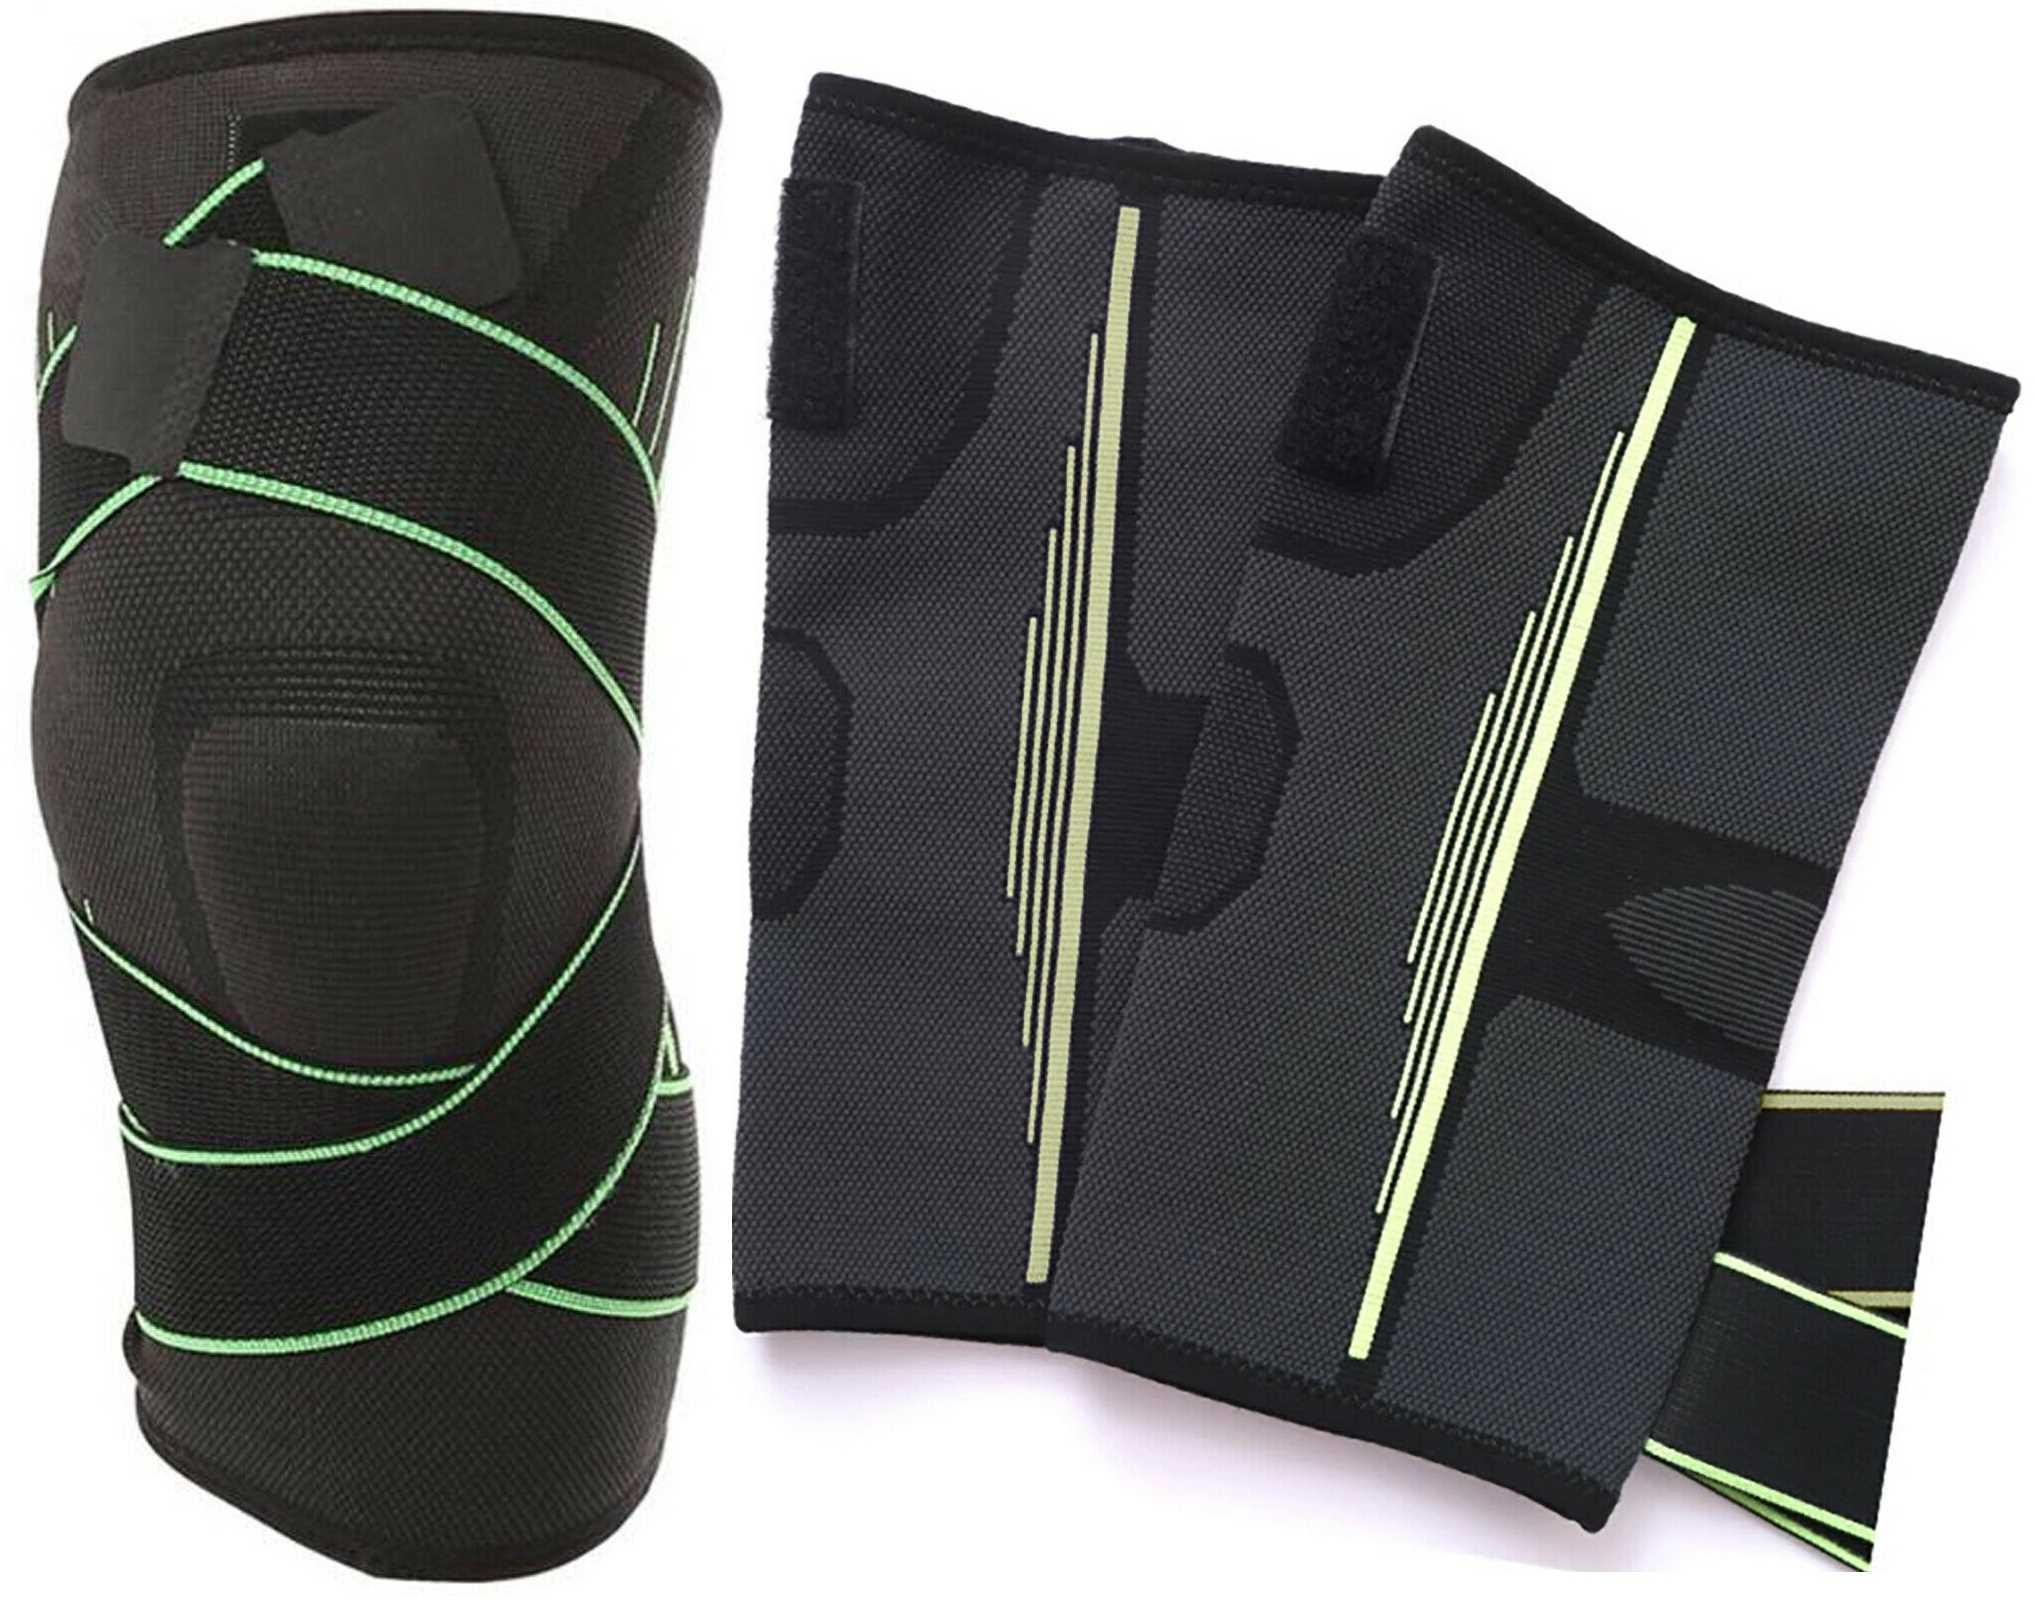 Medium Green Knee Support Brace Compression Extra Strap Support Sports Protector Adjustable